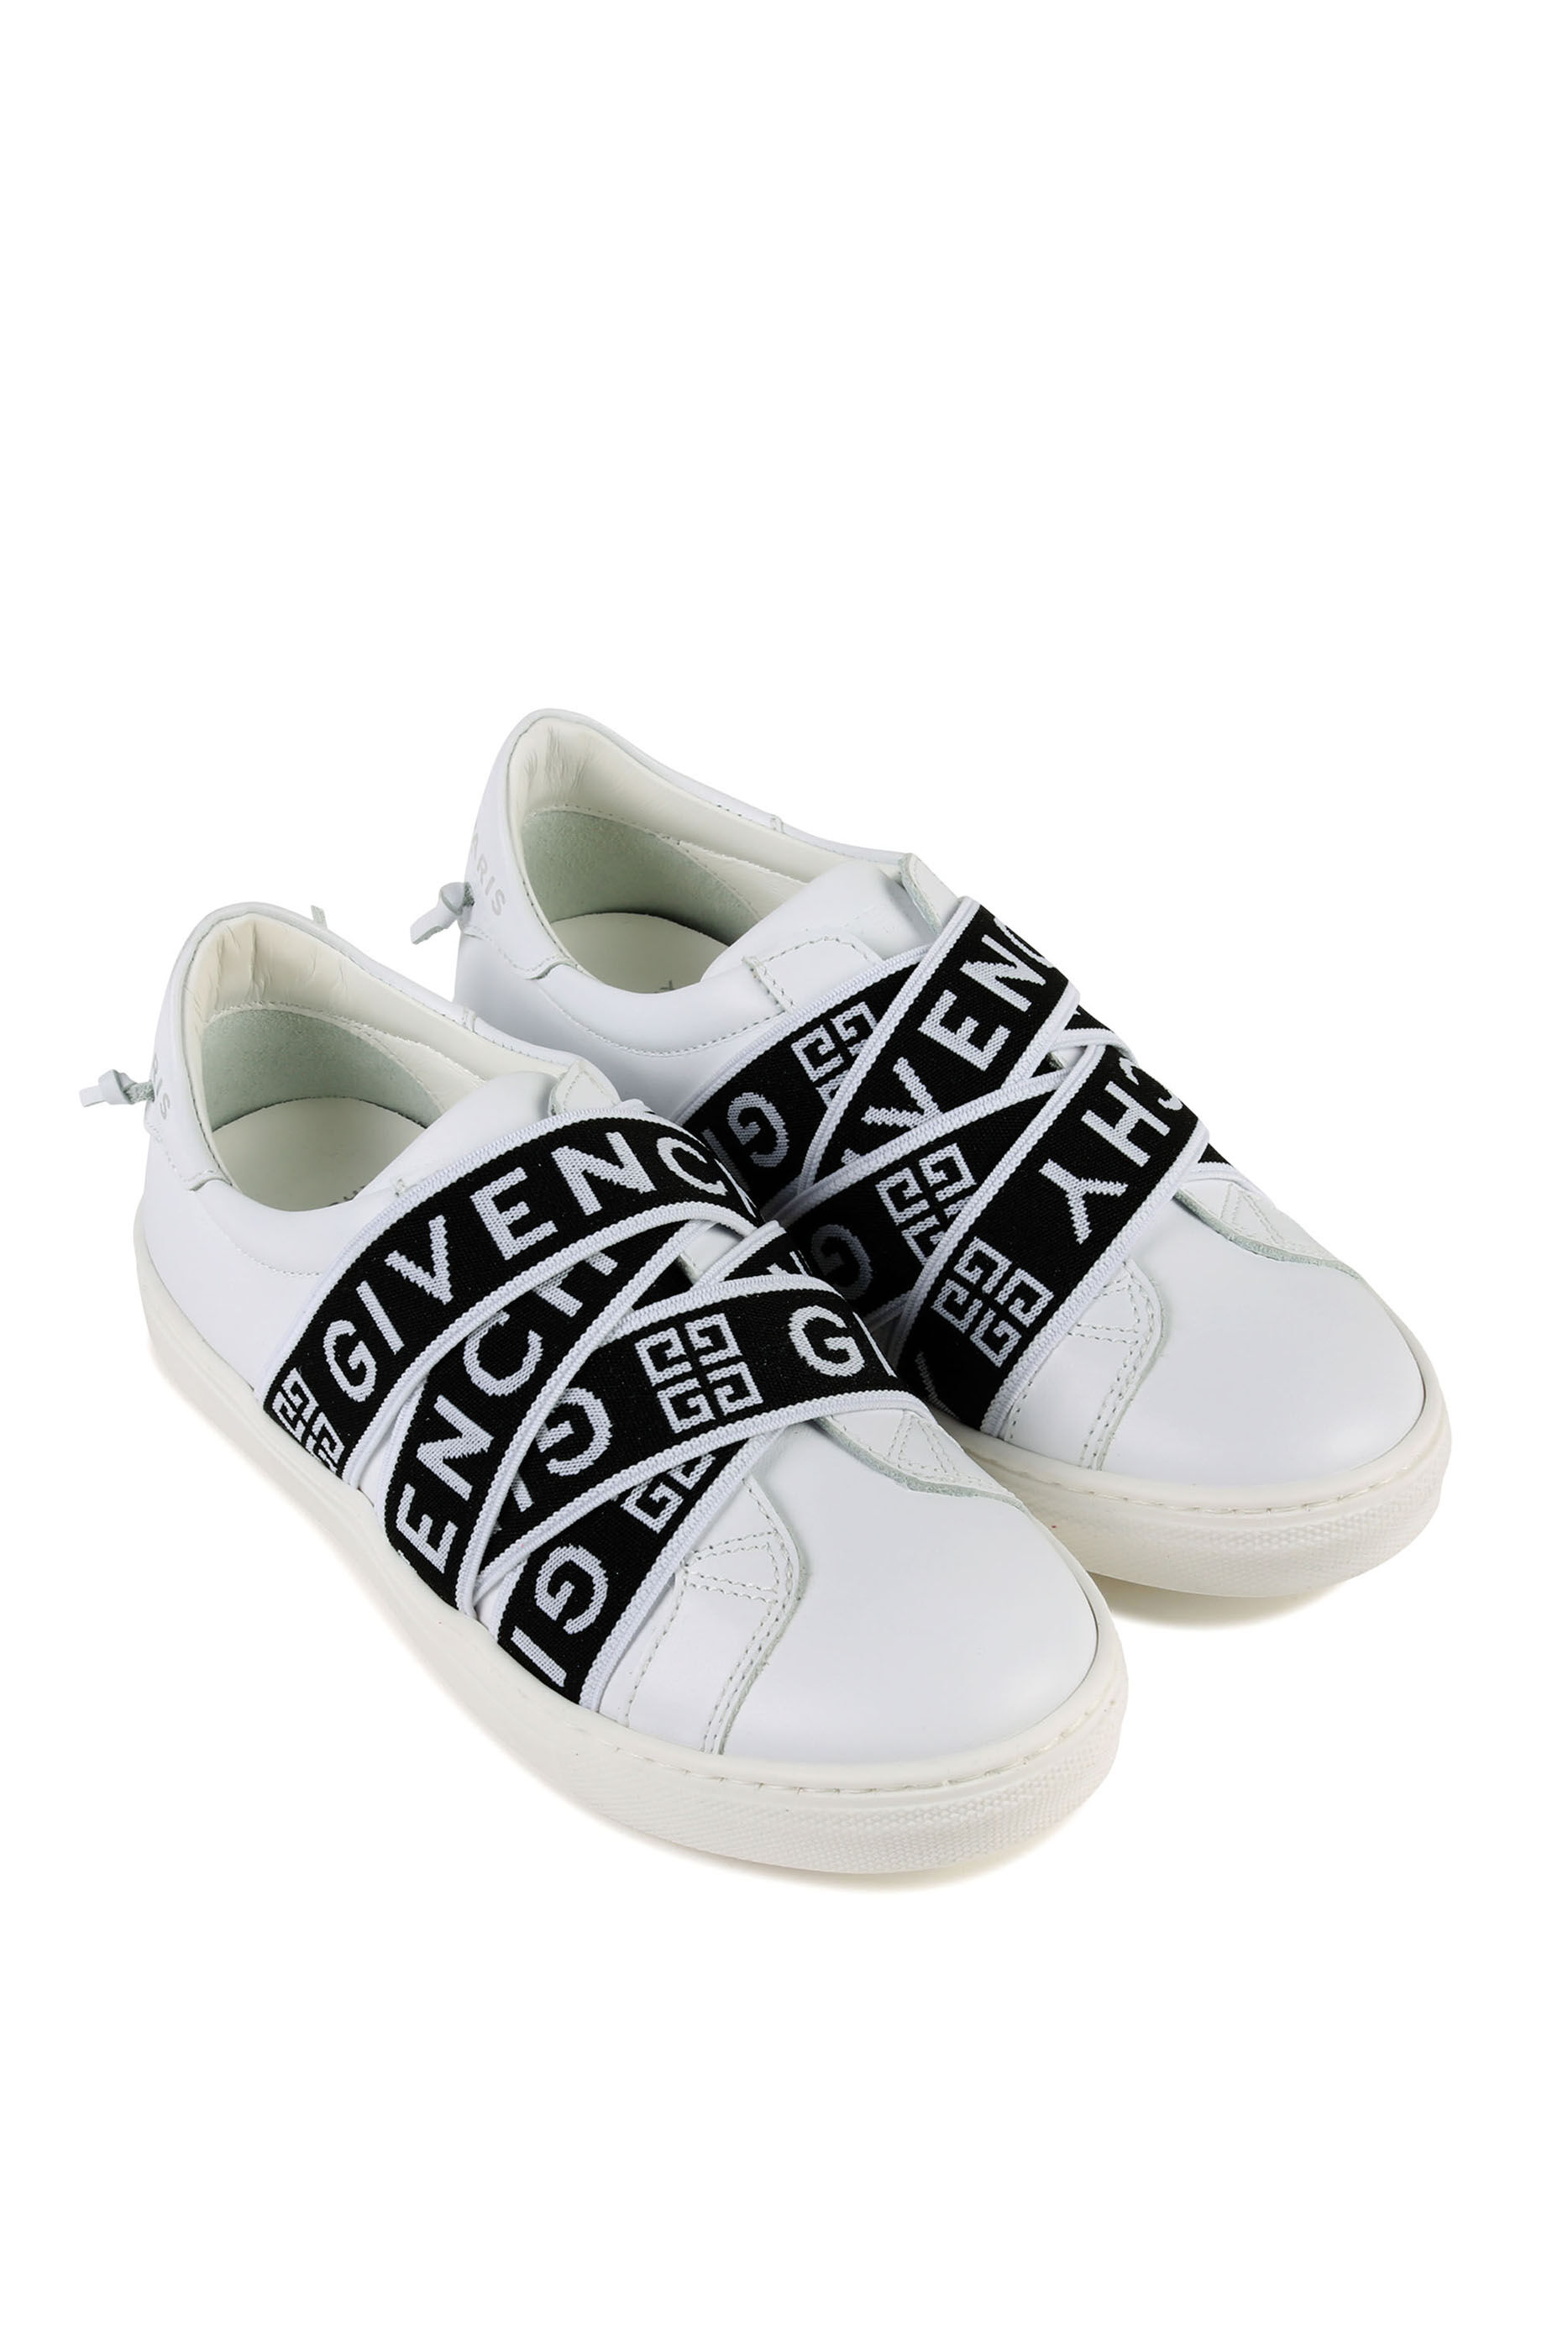 Buy Givenchy Logo Band Sneakers - Kids 